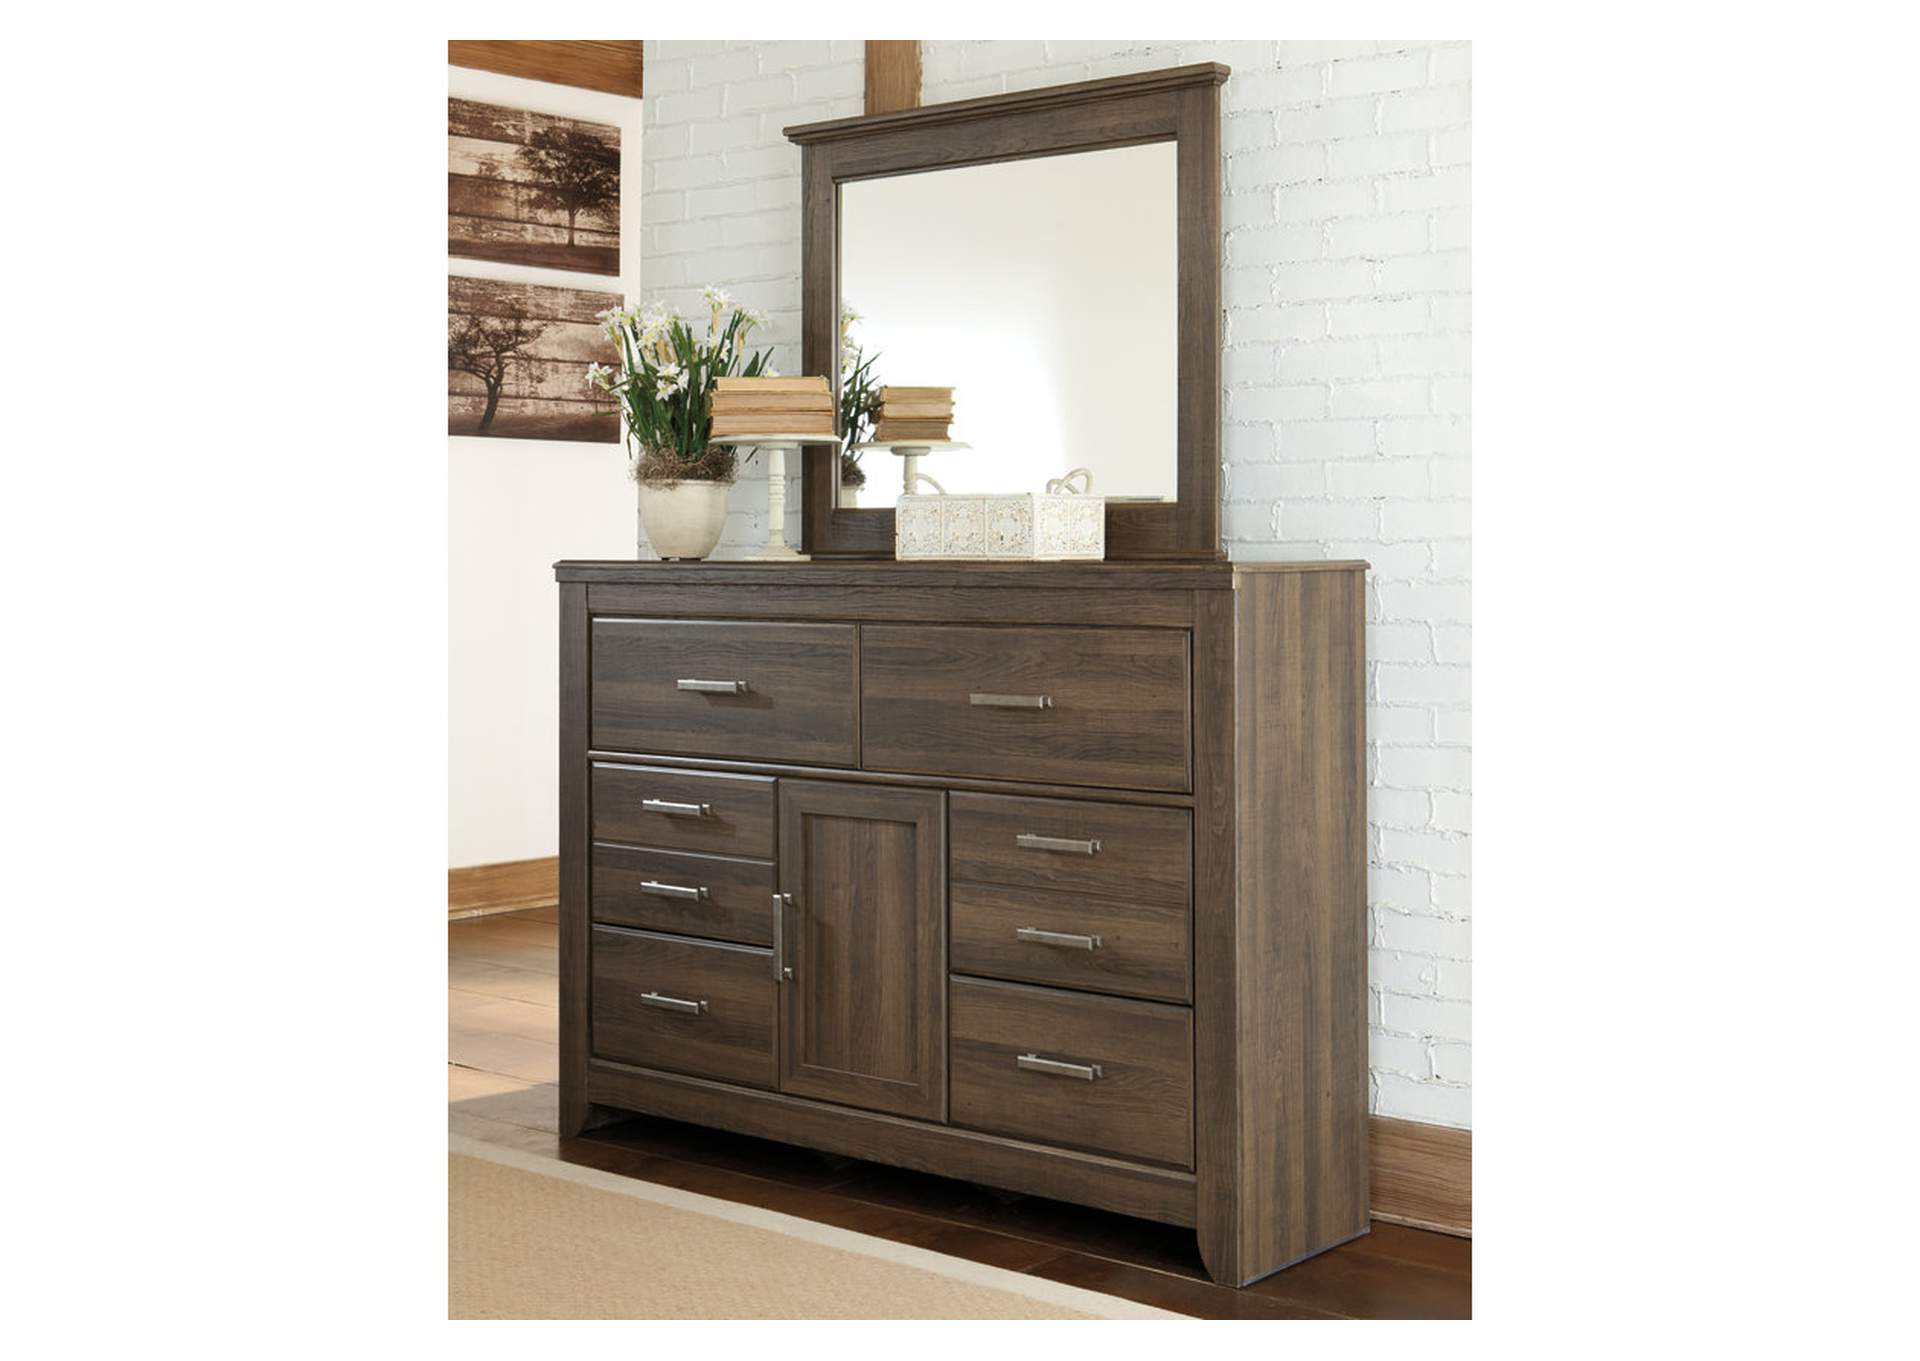 Juararo King Poster Bed with Mirrored Dresser and 2 Nightstands,Signature Design By Ashley